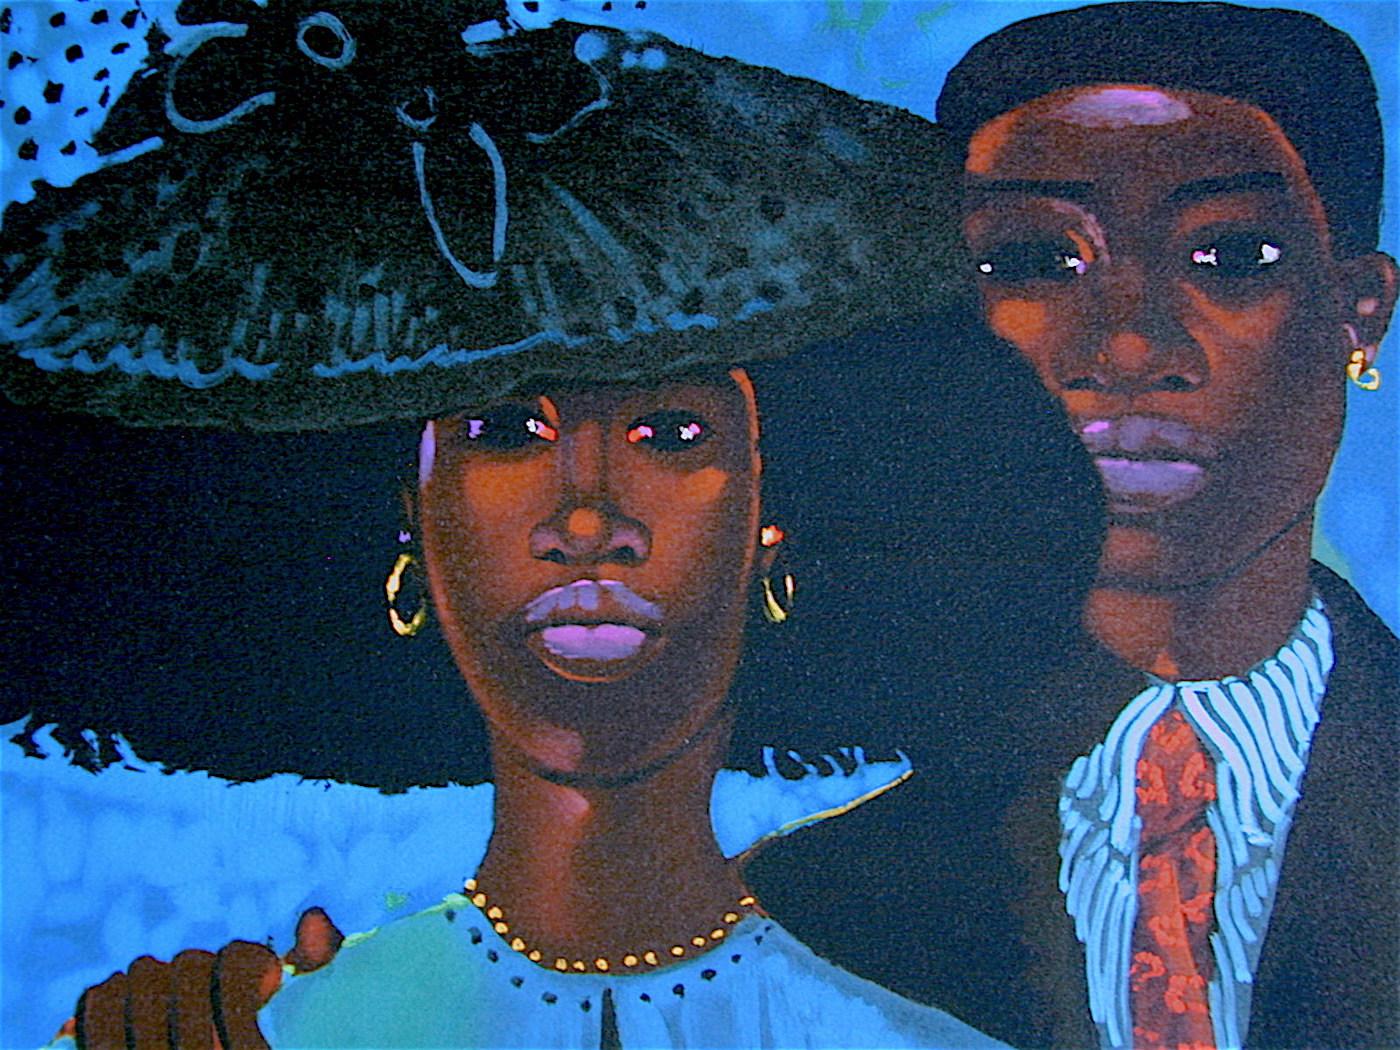 FAMILY IN BLUE Signed Lithograph, Black Family Portrait, Azure Blue, Warm Brown - Print by Geoffrey Holder